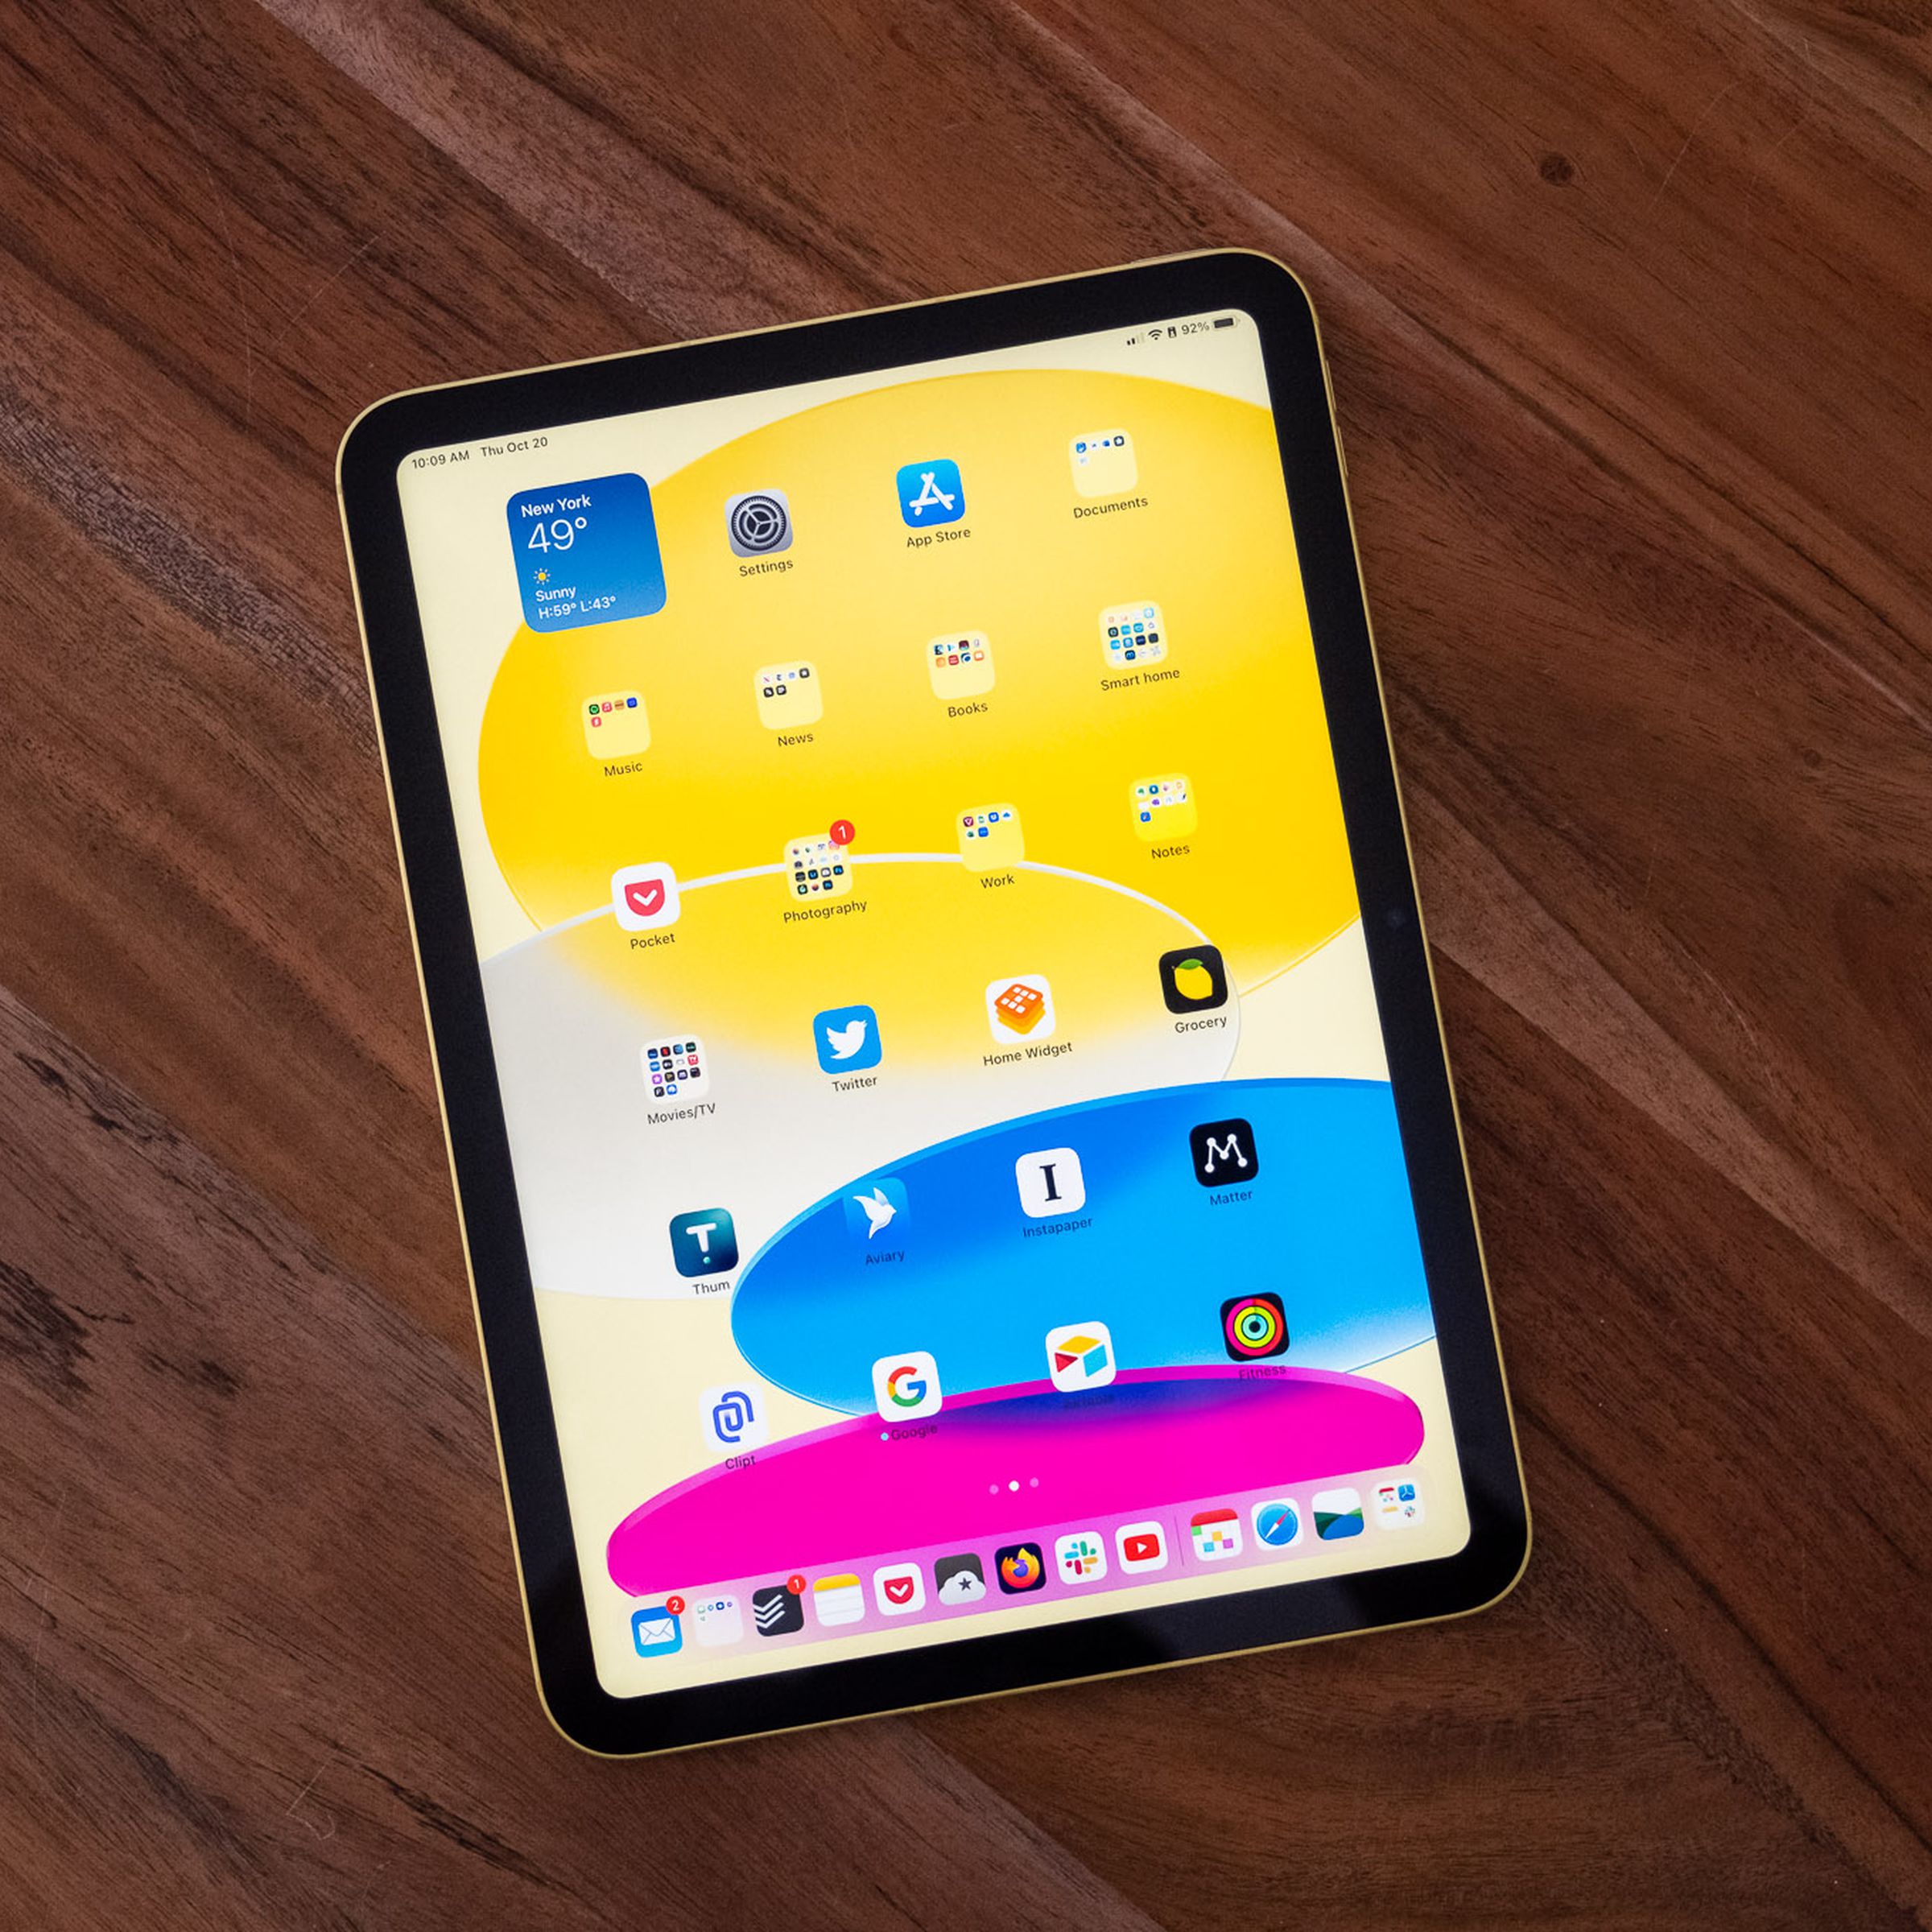 The 10th-gen iPad in yellow, resting face up on a wooden table.